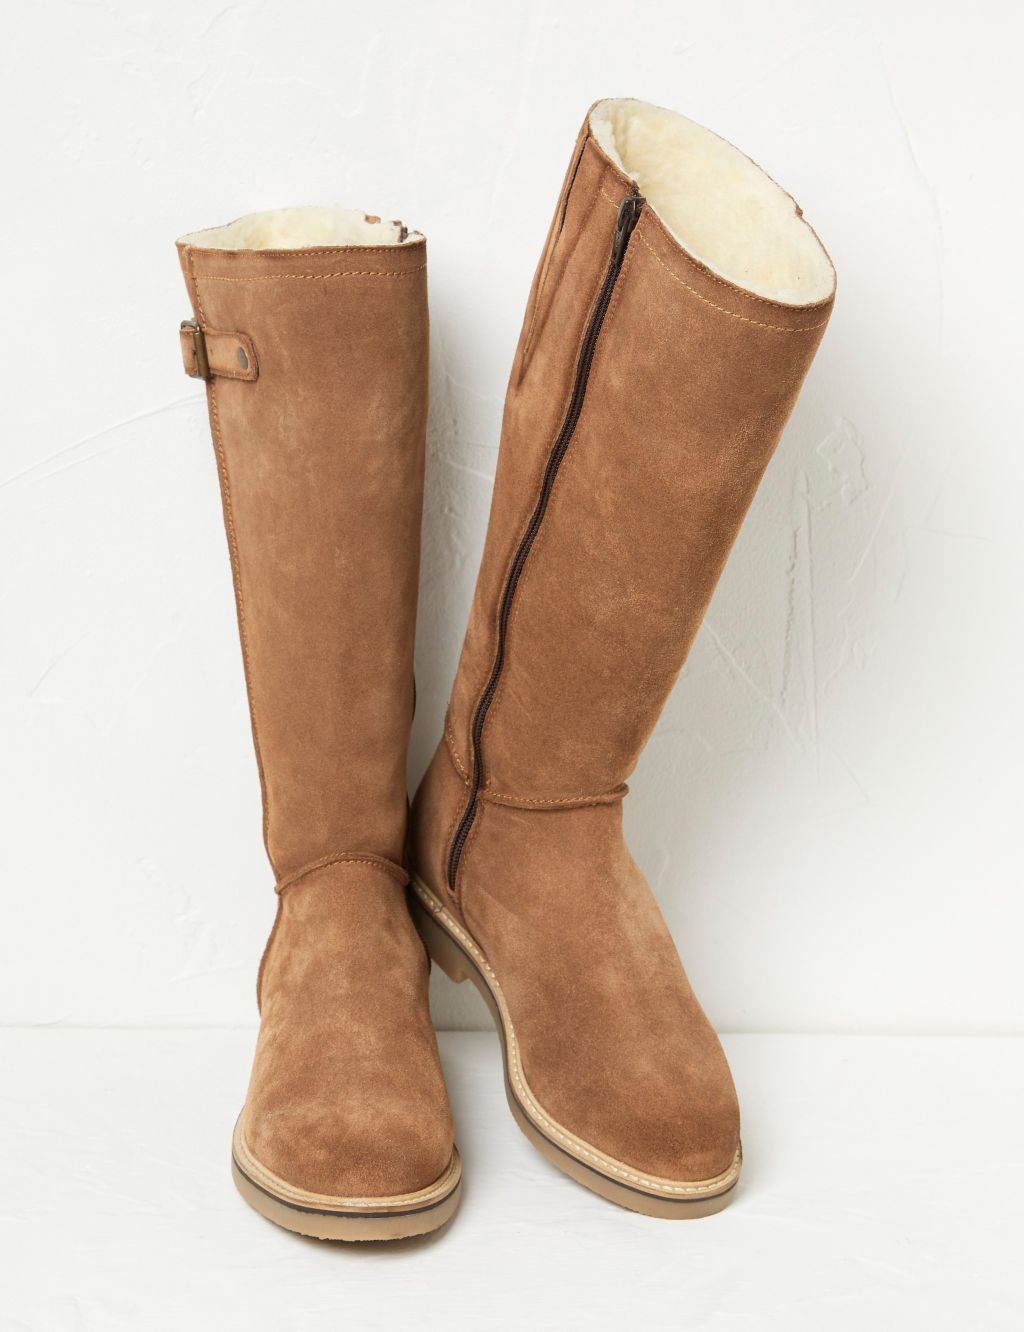 Suede Buckle Knee High Boots image 2